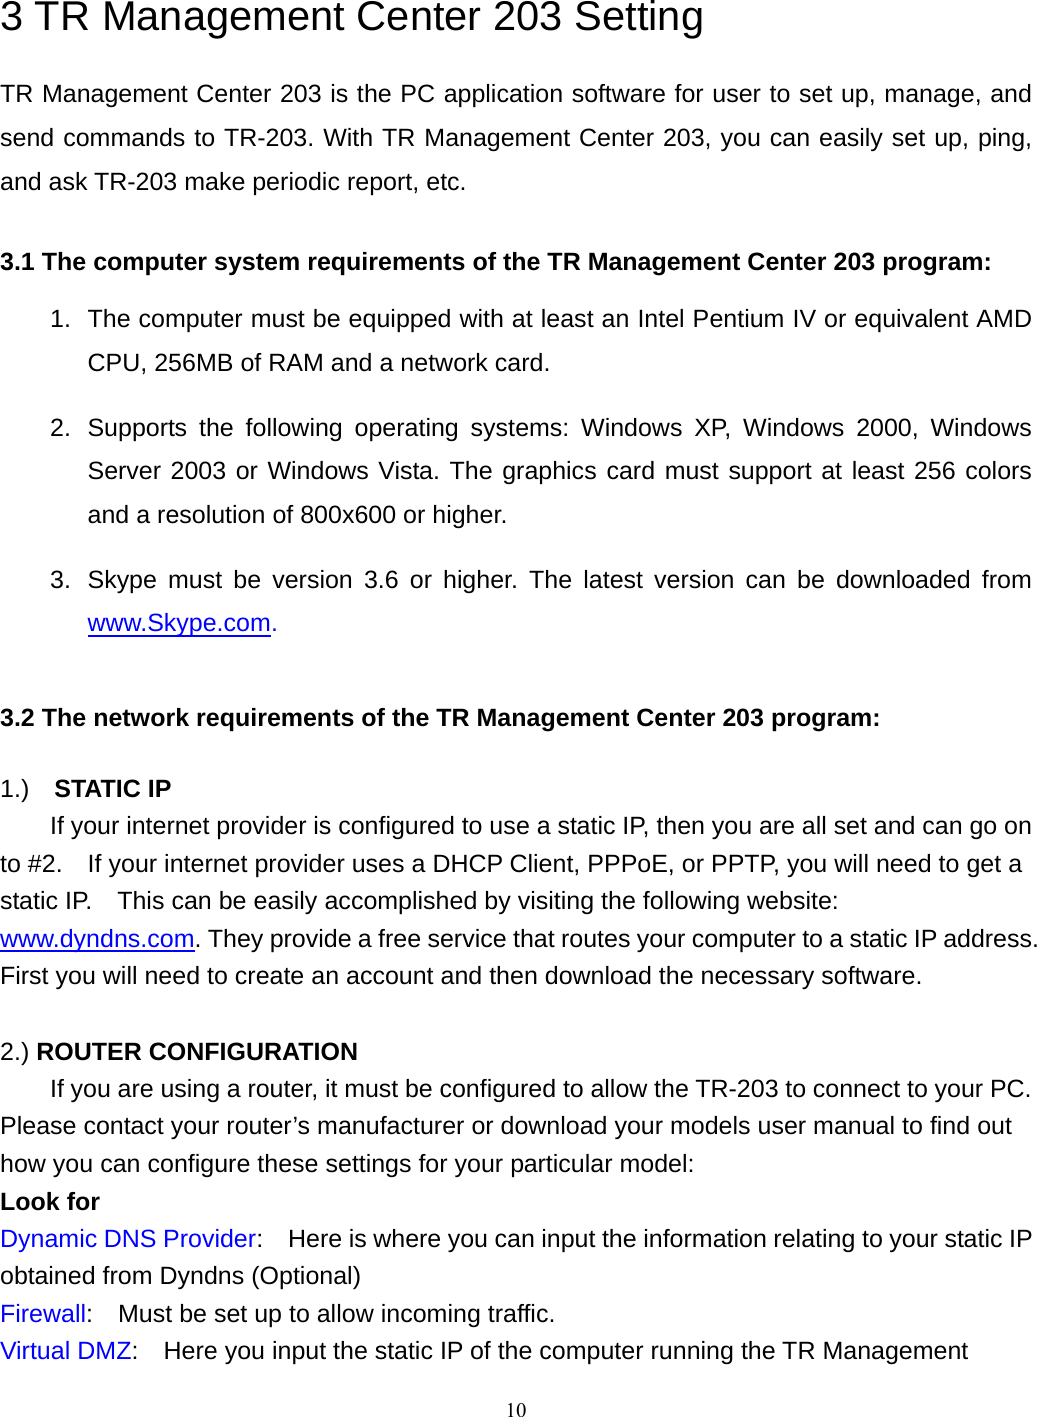  3 TR Management Center 203 Setting TR Management Center 203 is the PC application software for user to set up, manage, and send commands to TR-203. With TR Management Center 203, you can easily set up, ping, and ask TR-203 make periodic report, etc.    3.1 The computer system requirements of the TR Management Center 203 program: 1.  The computer must be equipped with at least an Intel Pentium IV or equivalent AMD CPU, 256MB of RAM and a network card.     2.  Supports the following operating systems: Windows XP, Windows 2000, Windows Server 2003 or Windows Vista. The graphics card must support at least 256 colors and a resolution of 800x600 or higher.   3.  Skype must be version 3.6 or higher. The latest version can be downloaded from www.Skype.com.   3.2 The network requirements of the TR Management Center 203 program:  1.)  STATIC IP   If your internet provider is configured to use a static IP, then you are all set and can go on to #2.    If your internet provider uses a DHCP Client, PPPoE, or PPTP, you will need to get a static IP.    This can be easily accomplished by visiting the following website: www.dyndns.com. They provide a free service that routes your computer to a static IP address.   First you will need to create an account and then download the necessary software.        2.) ROUTER CONFIGURATION   If you are using a router, it must be configured to allow the TR-203 to connect to your PC.   Please contact your router’s manufacturer or download your models user manual to find out how you can configure these settings for your particular model: Look for Dynamic DNS Provider:    Here is where you can input the information relating to your static IP obtained from Dyndns (Optional) Firewall:    Must be set up to allow incoming traffic. Virtual DMZ:    Here you input the static IP of the computer running the TR Management  10